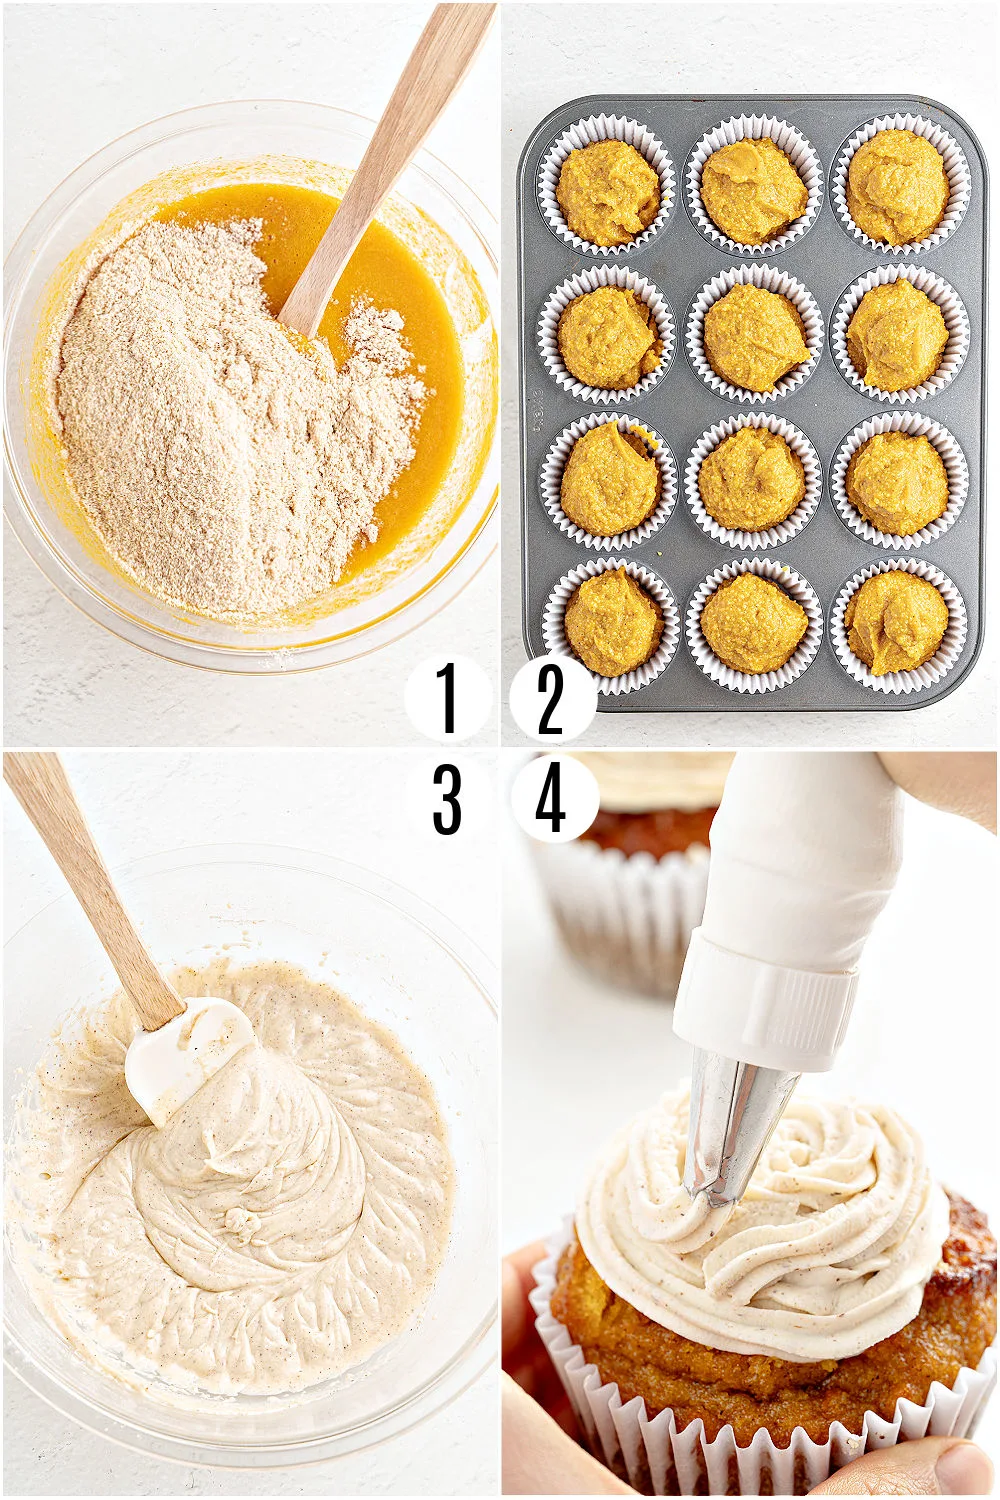 Step by step photos showing how to make keto pumpkin cupcakes.